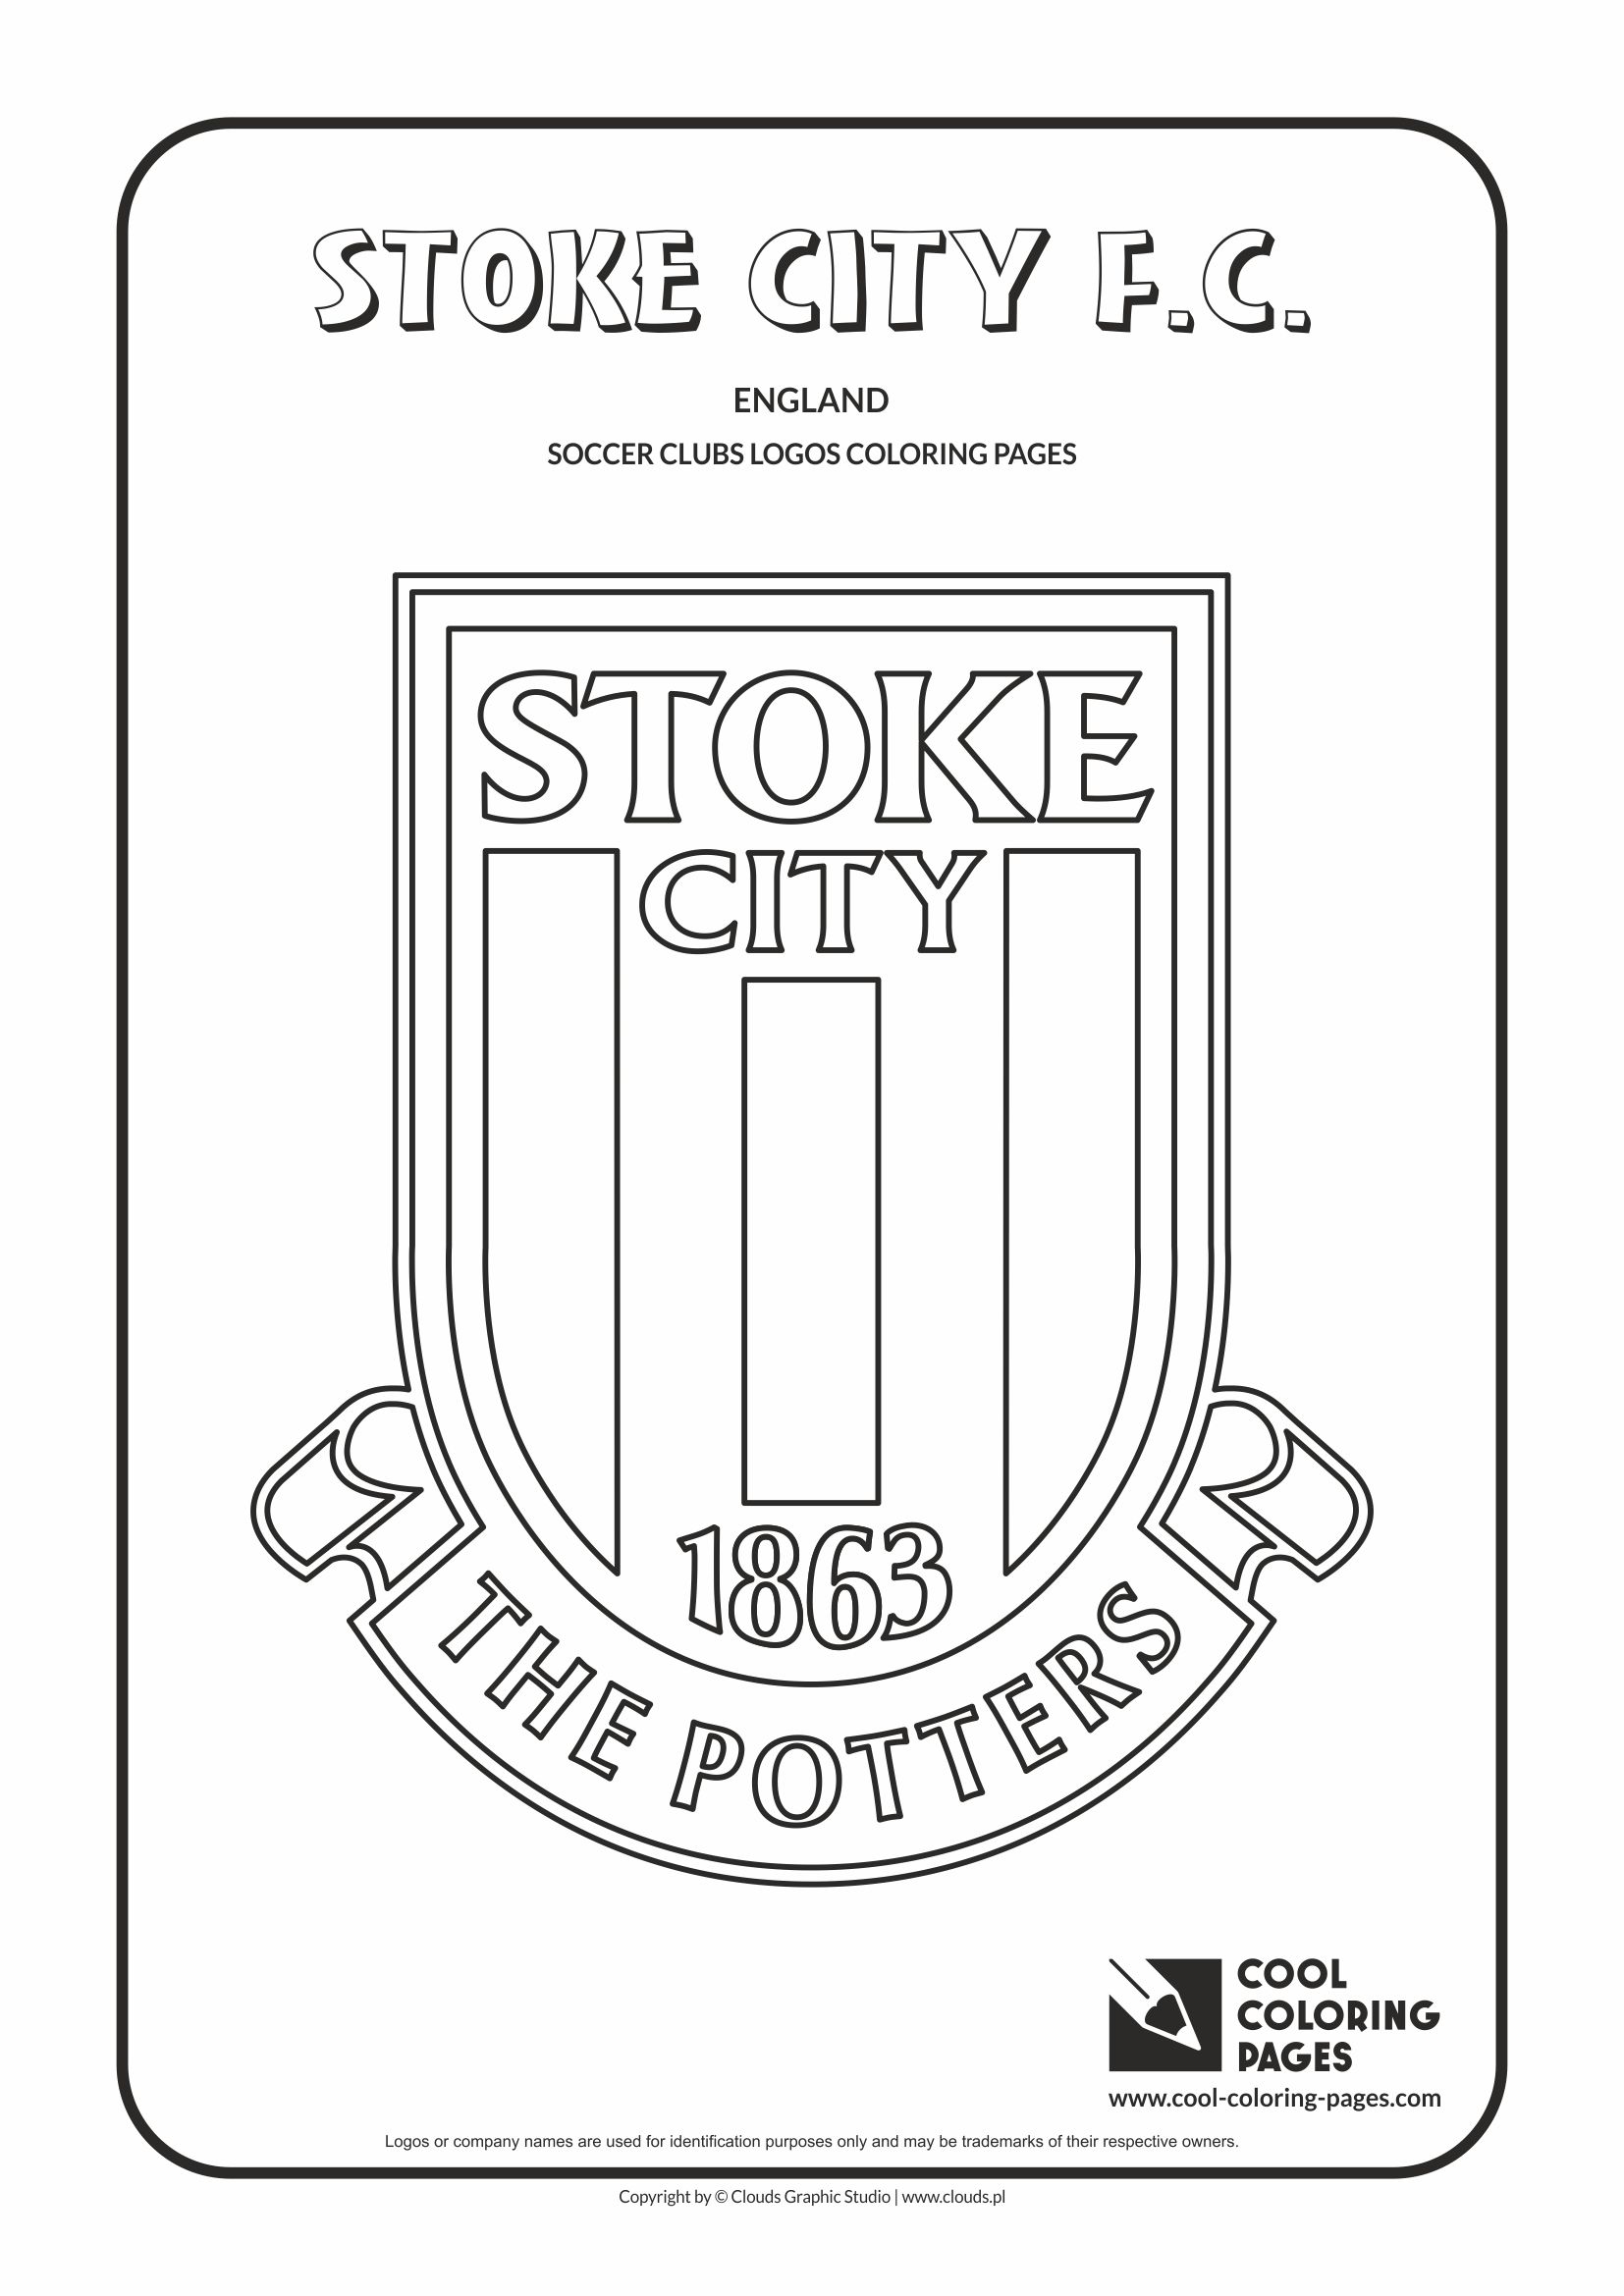 Stoke City F.C. logo coloring / Coloring page with Stoke City F.C. logo / Stoke City F.C. logo colouring page.